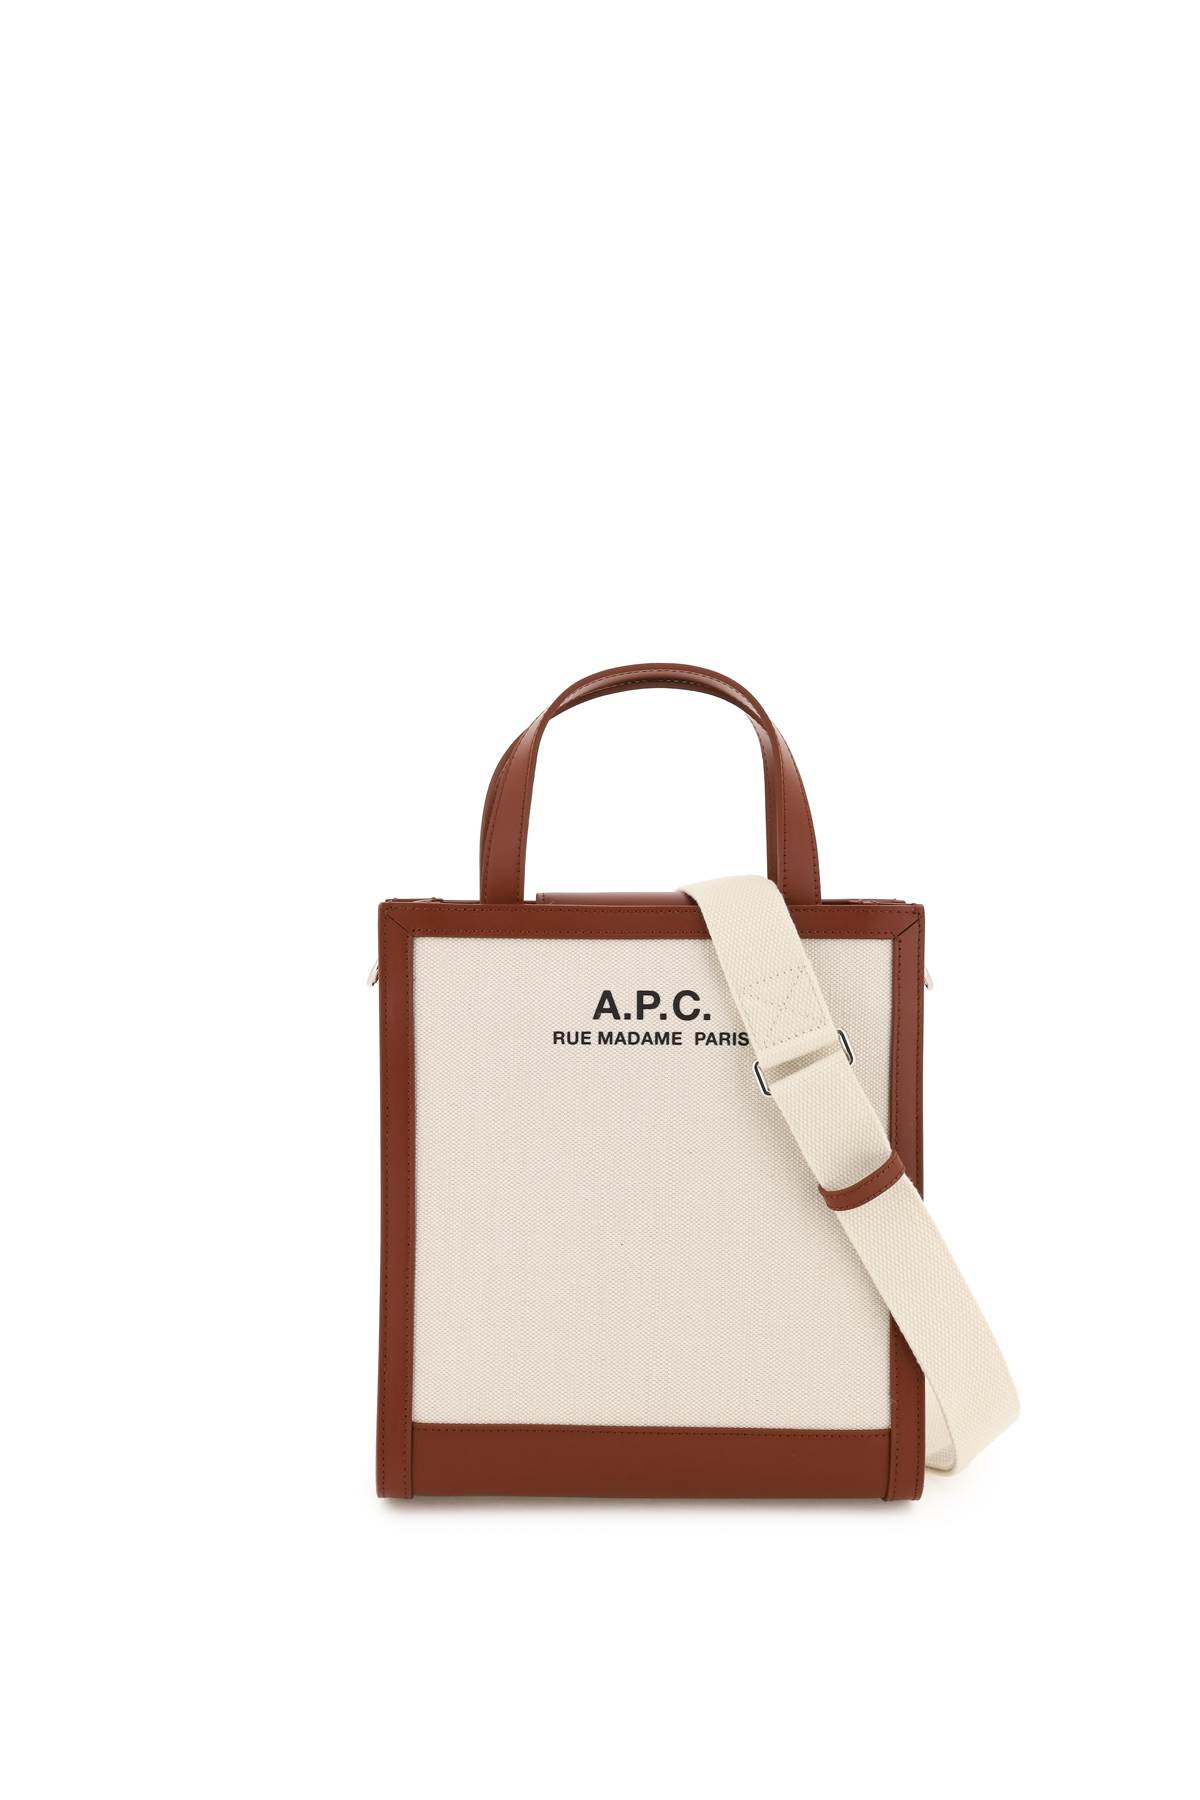 A.P.C. Small camille Tote Bag